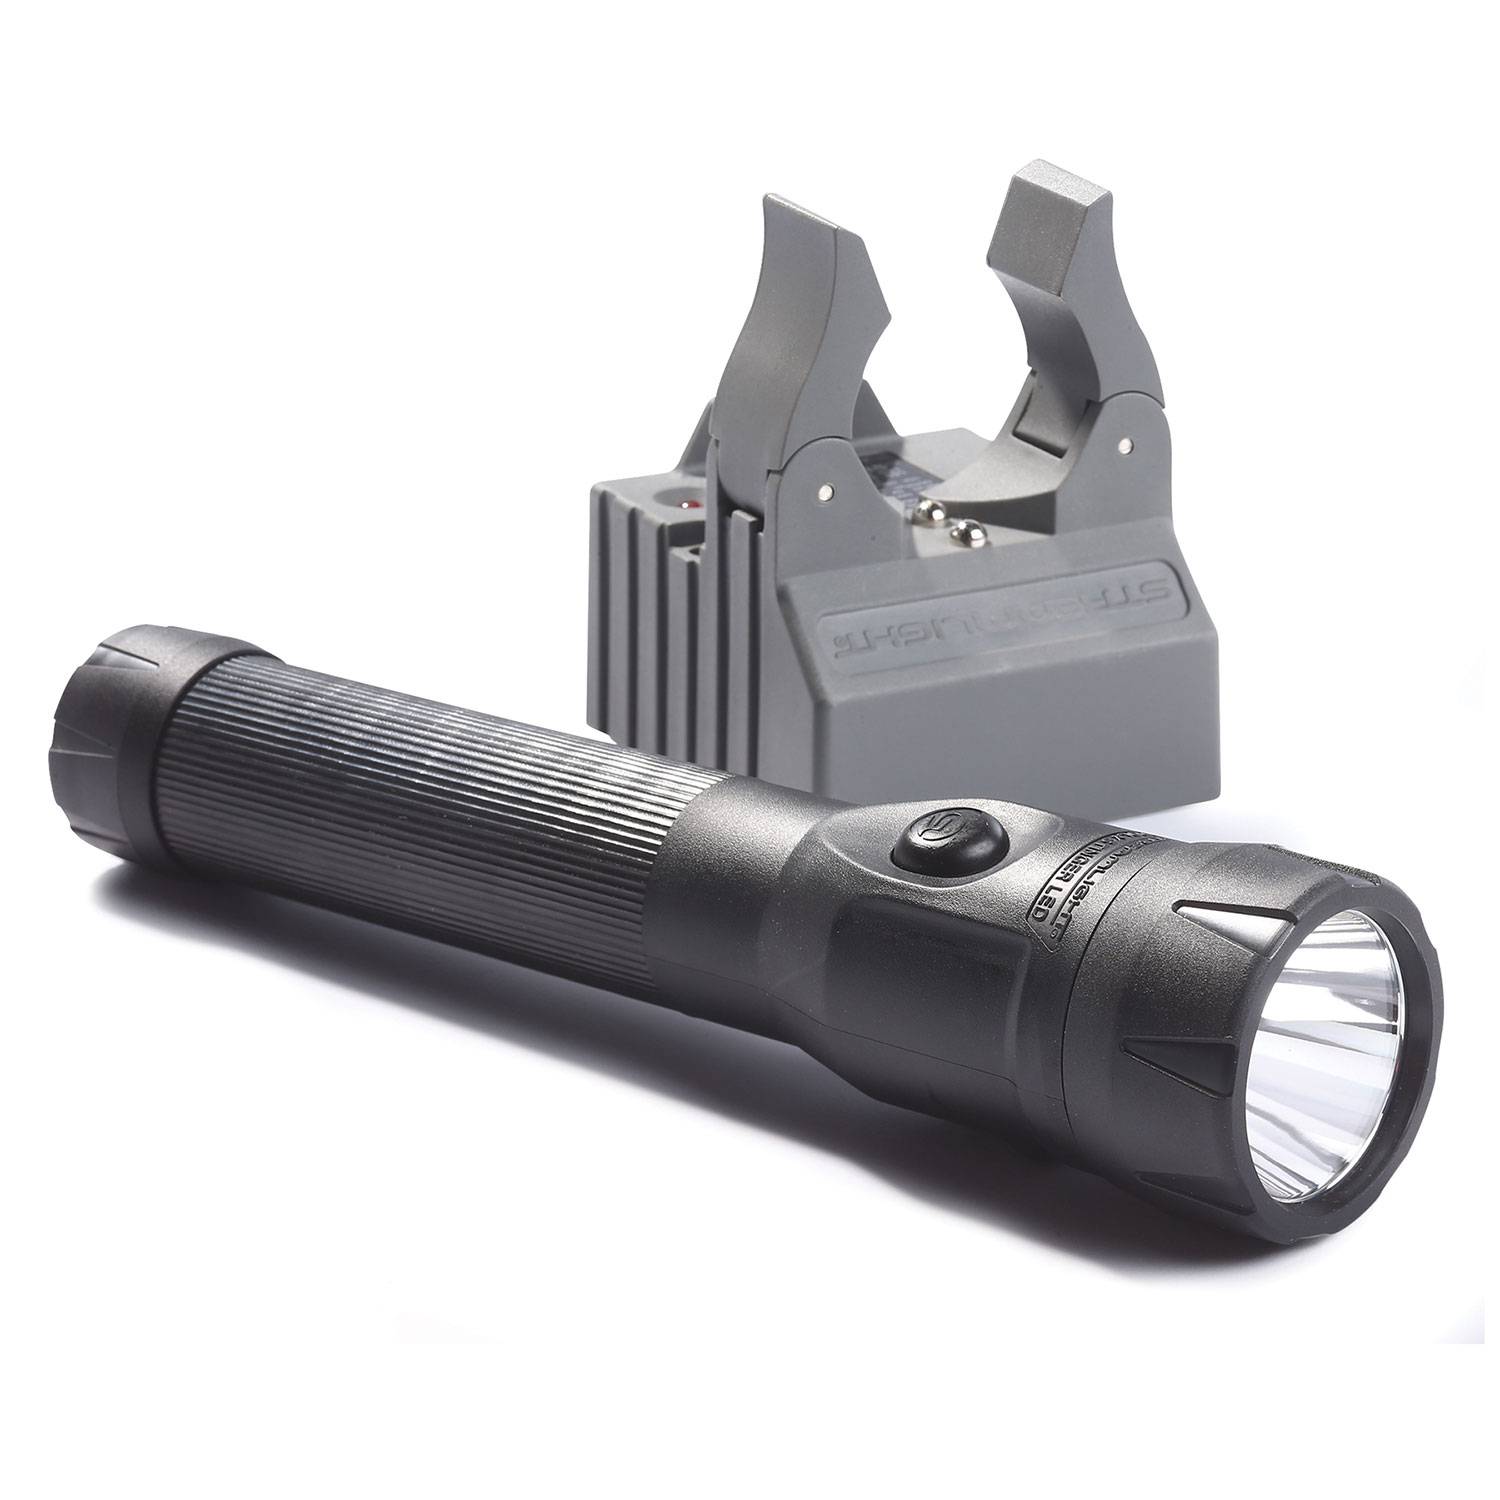 STREAMLIGHT POLYSTINGER C4 LED RECHARGEABLE FLASHLIGHT WITH